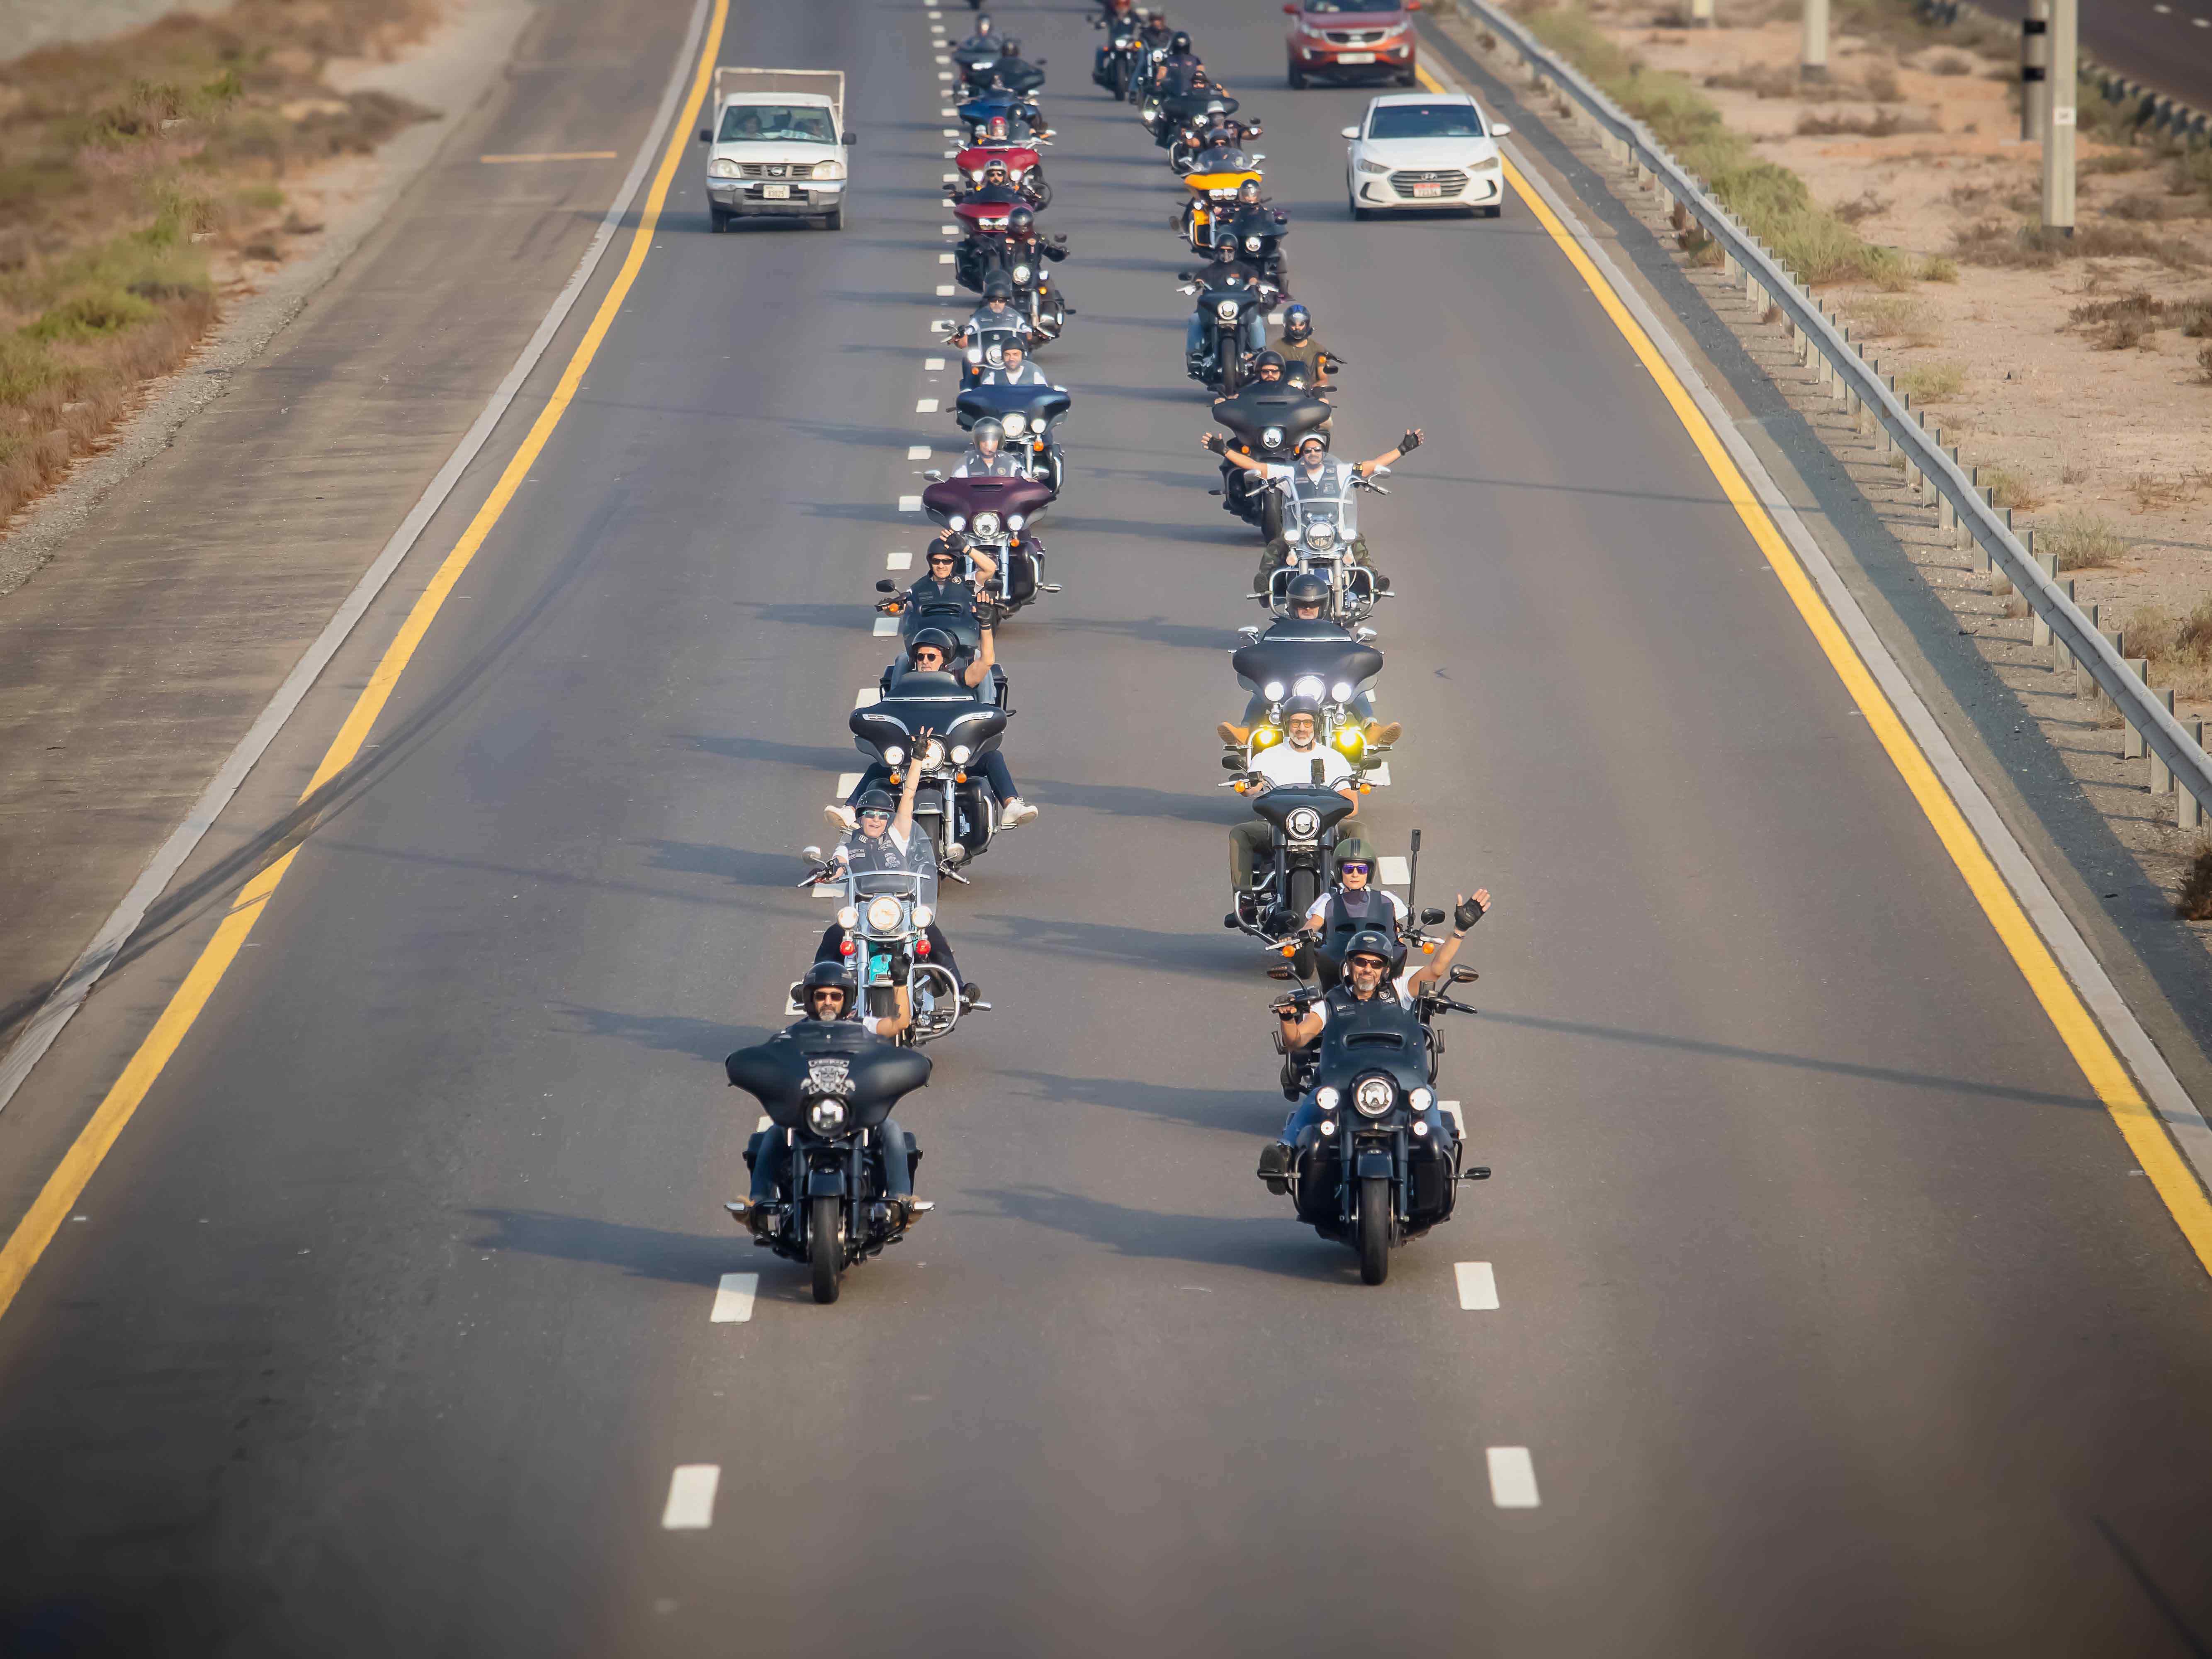 Cruising for a Cause: MCN and McCann Health Rev Up Prostate Cancer Awareness in Dubai